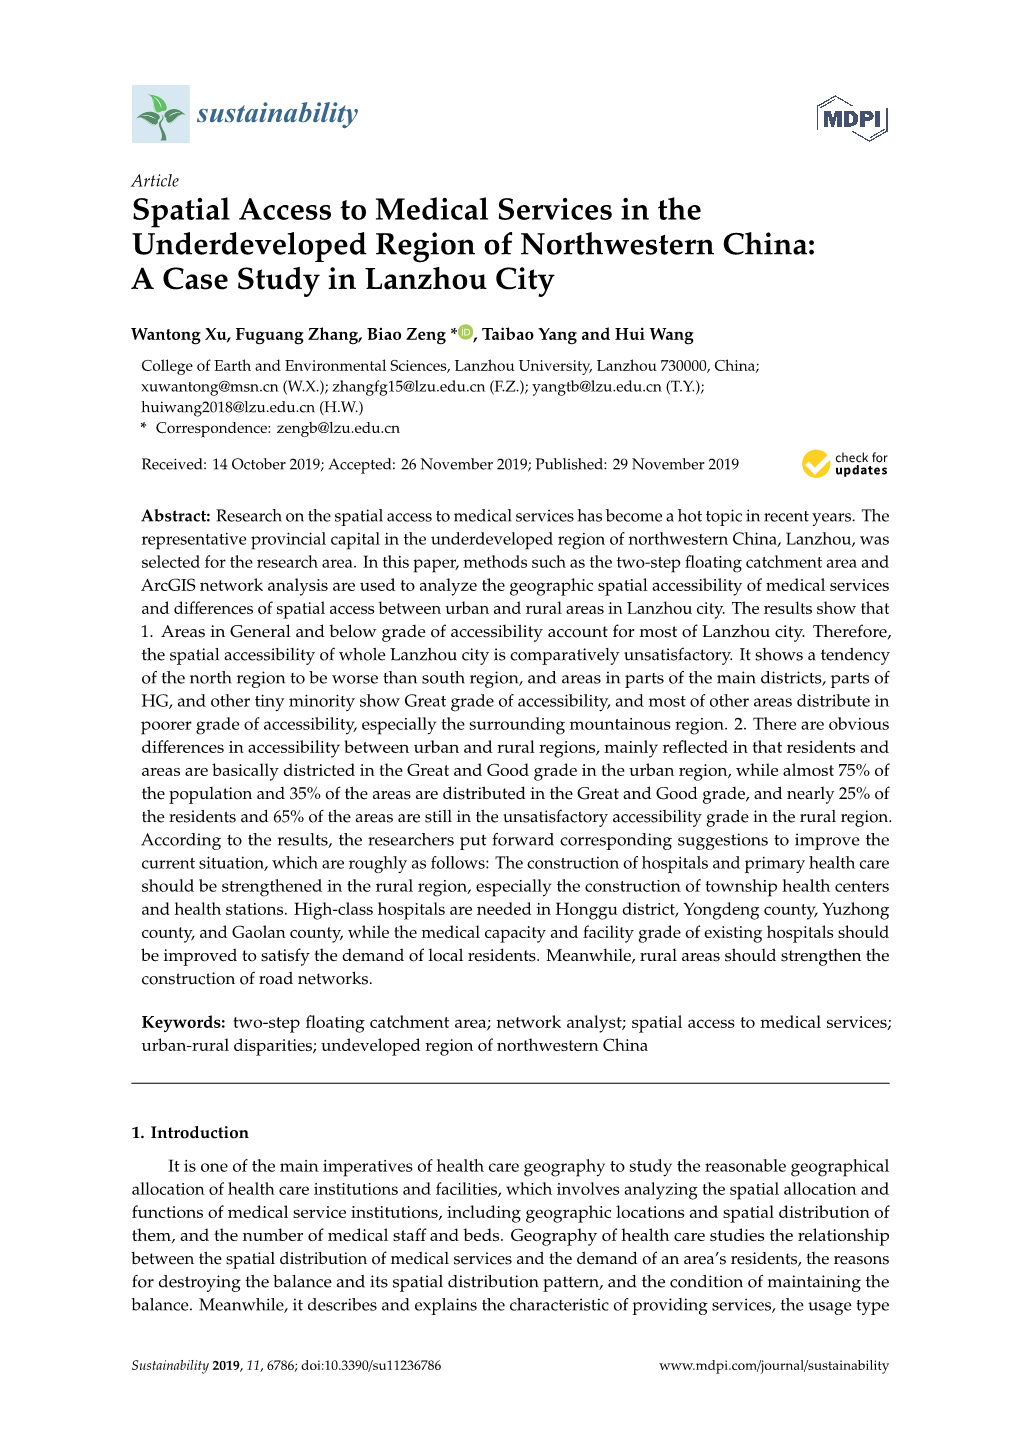 Spatial Access to Medical Services in the Underdeveloped Region of Northwestern China: a Case Study in Lanzhou City